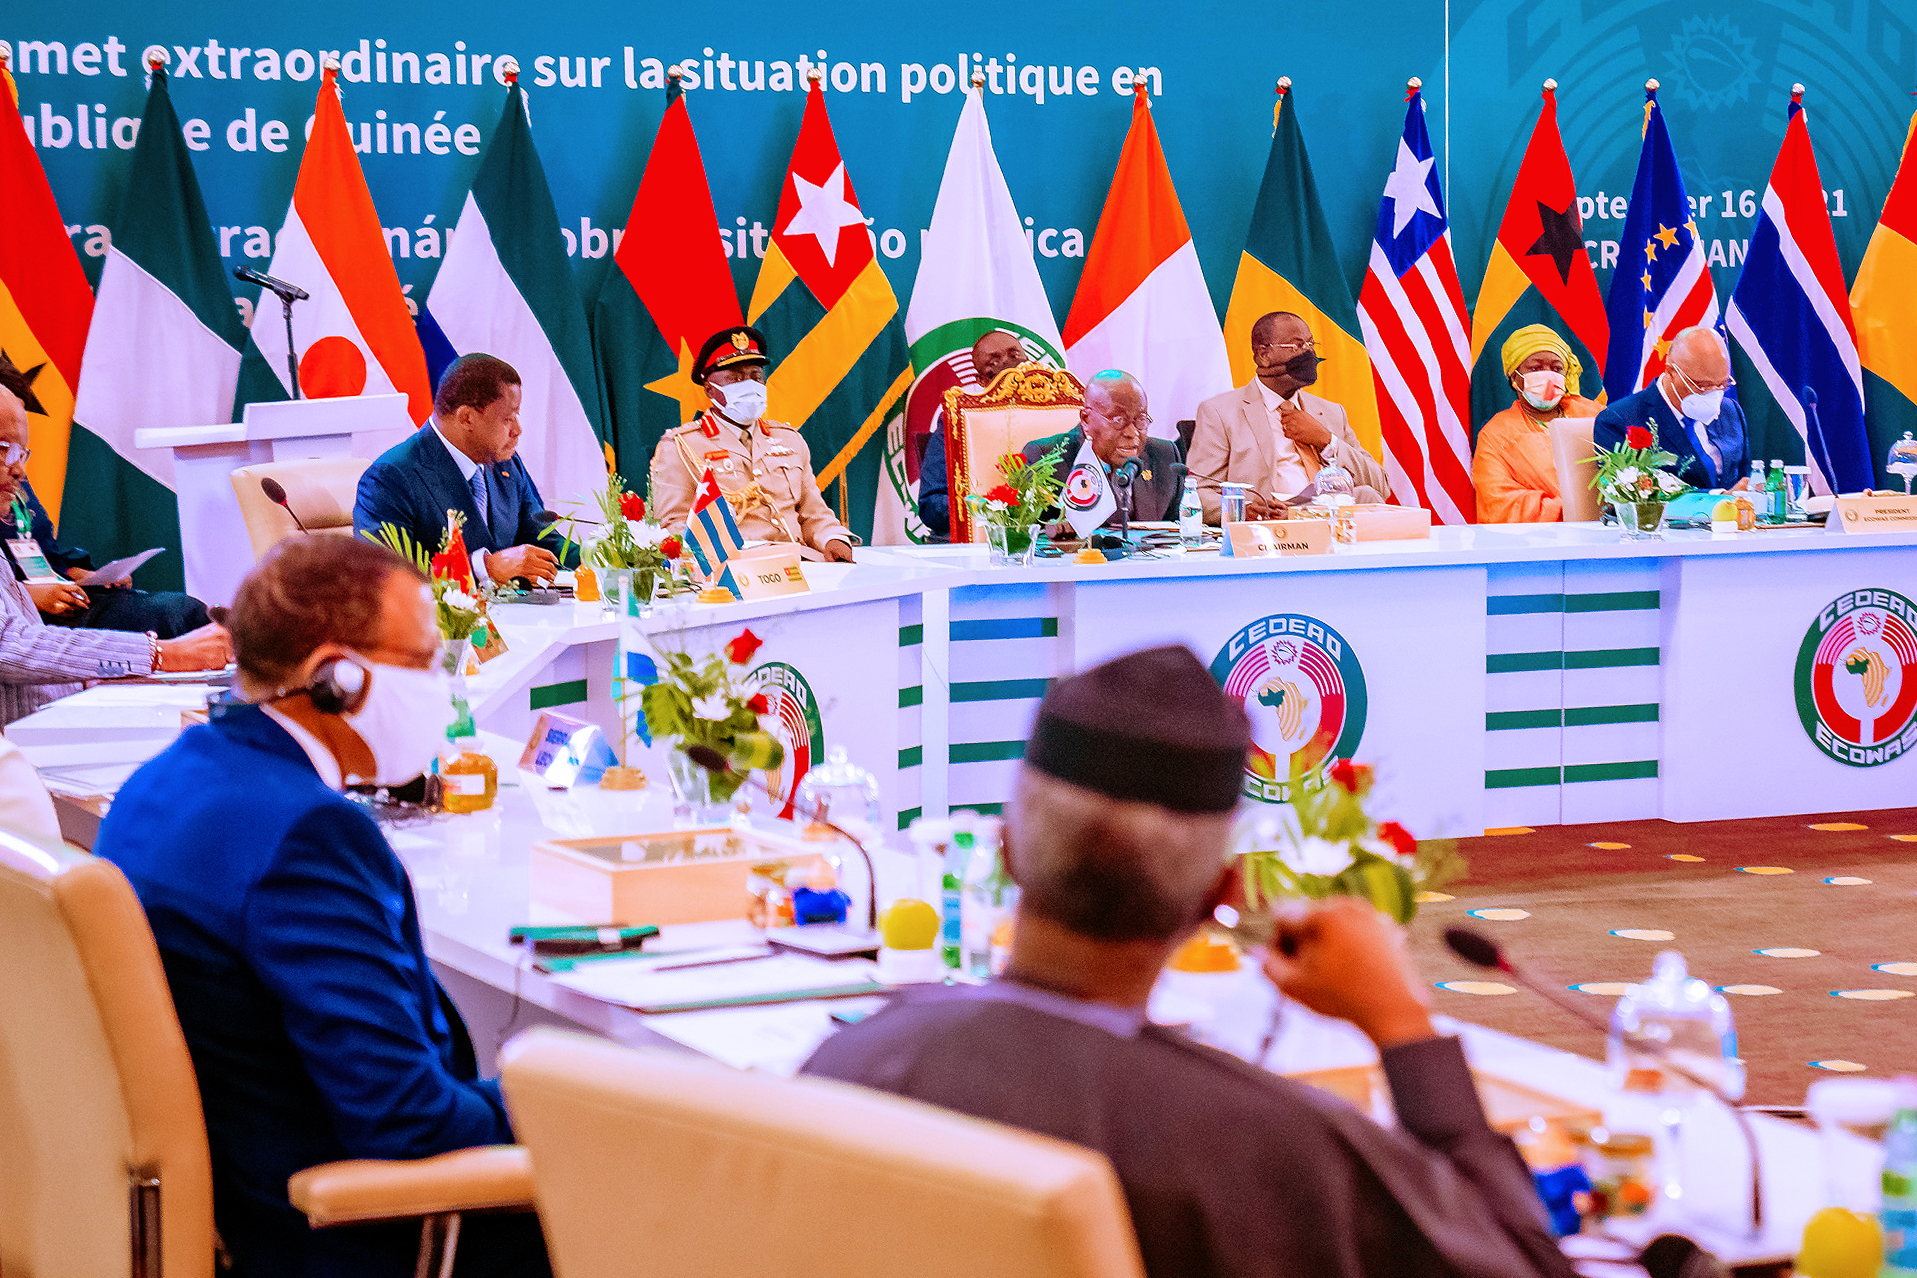 ECOWAS Extraordinary Summit: Nigeria, ECOWAS Insist On Prompt Transition To Civil Rule In Guinea